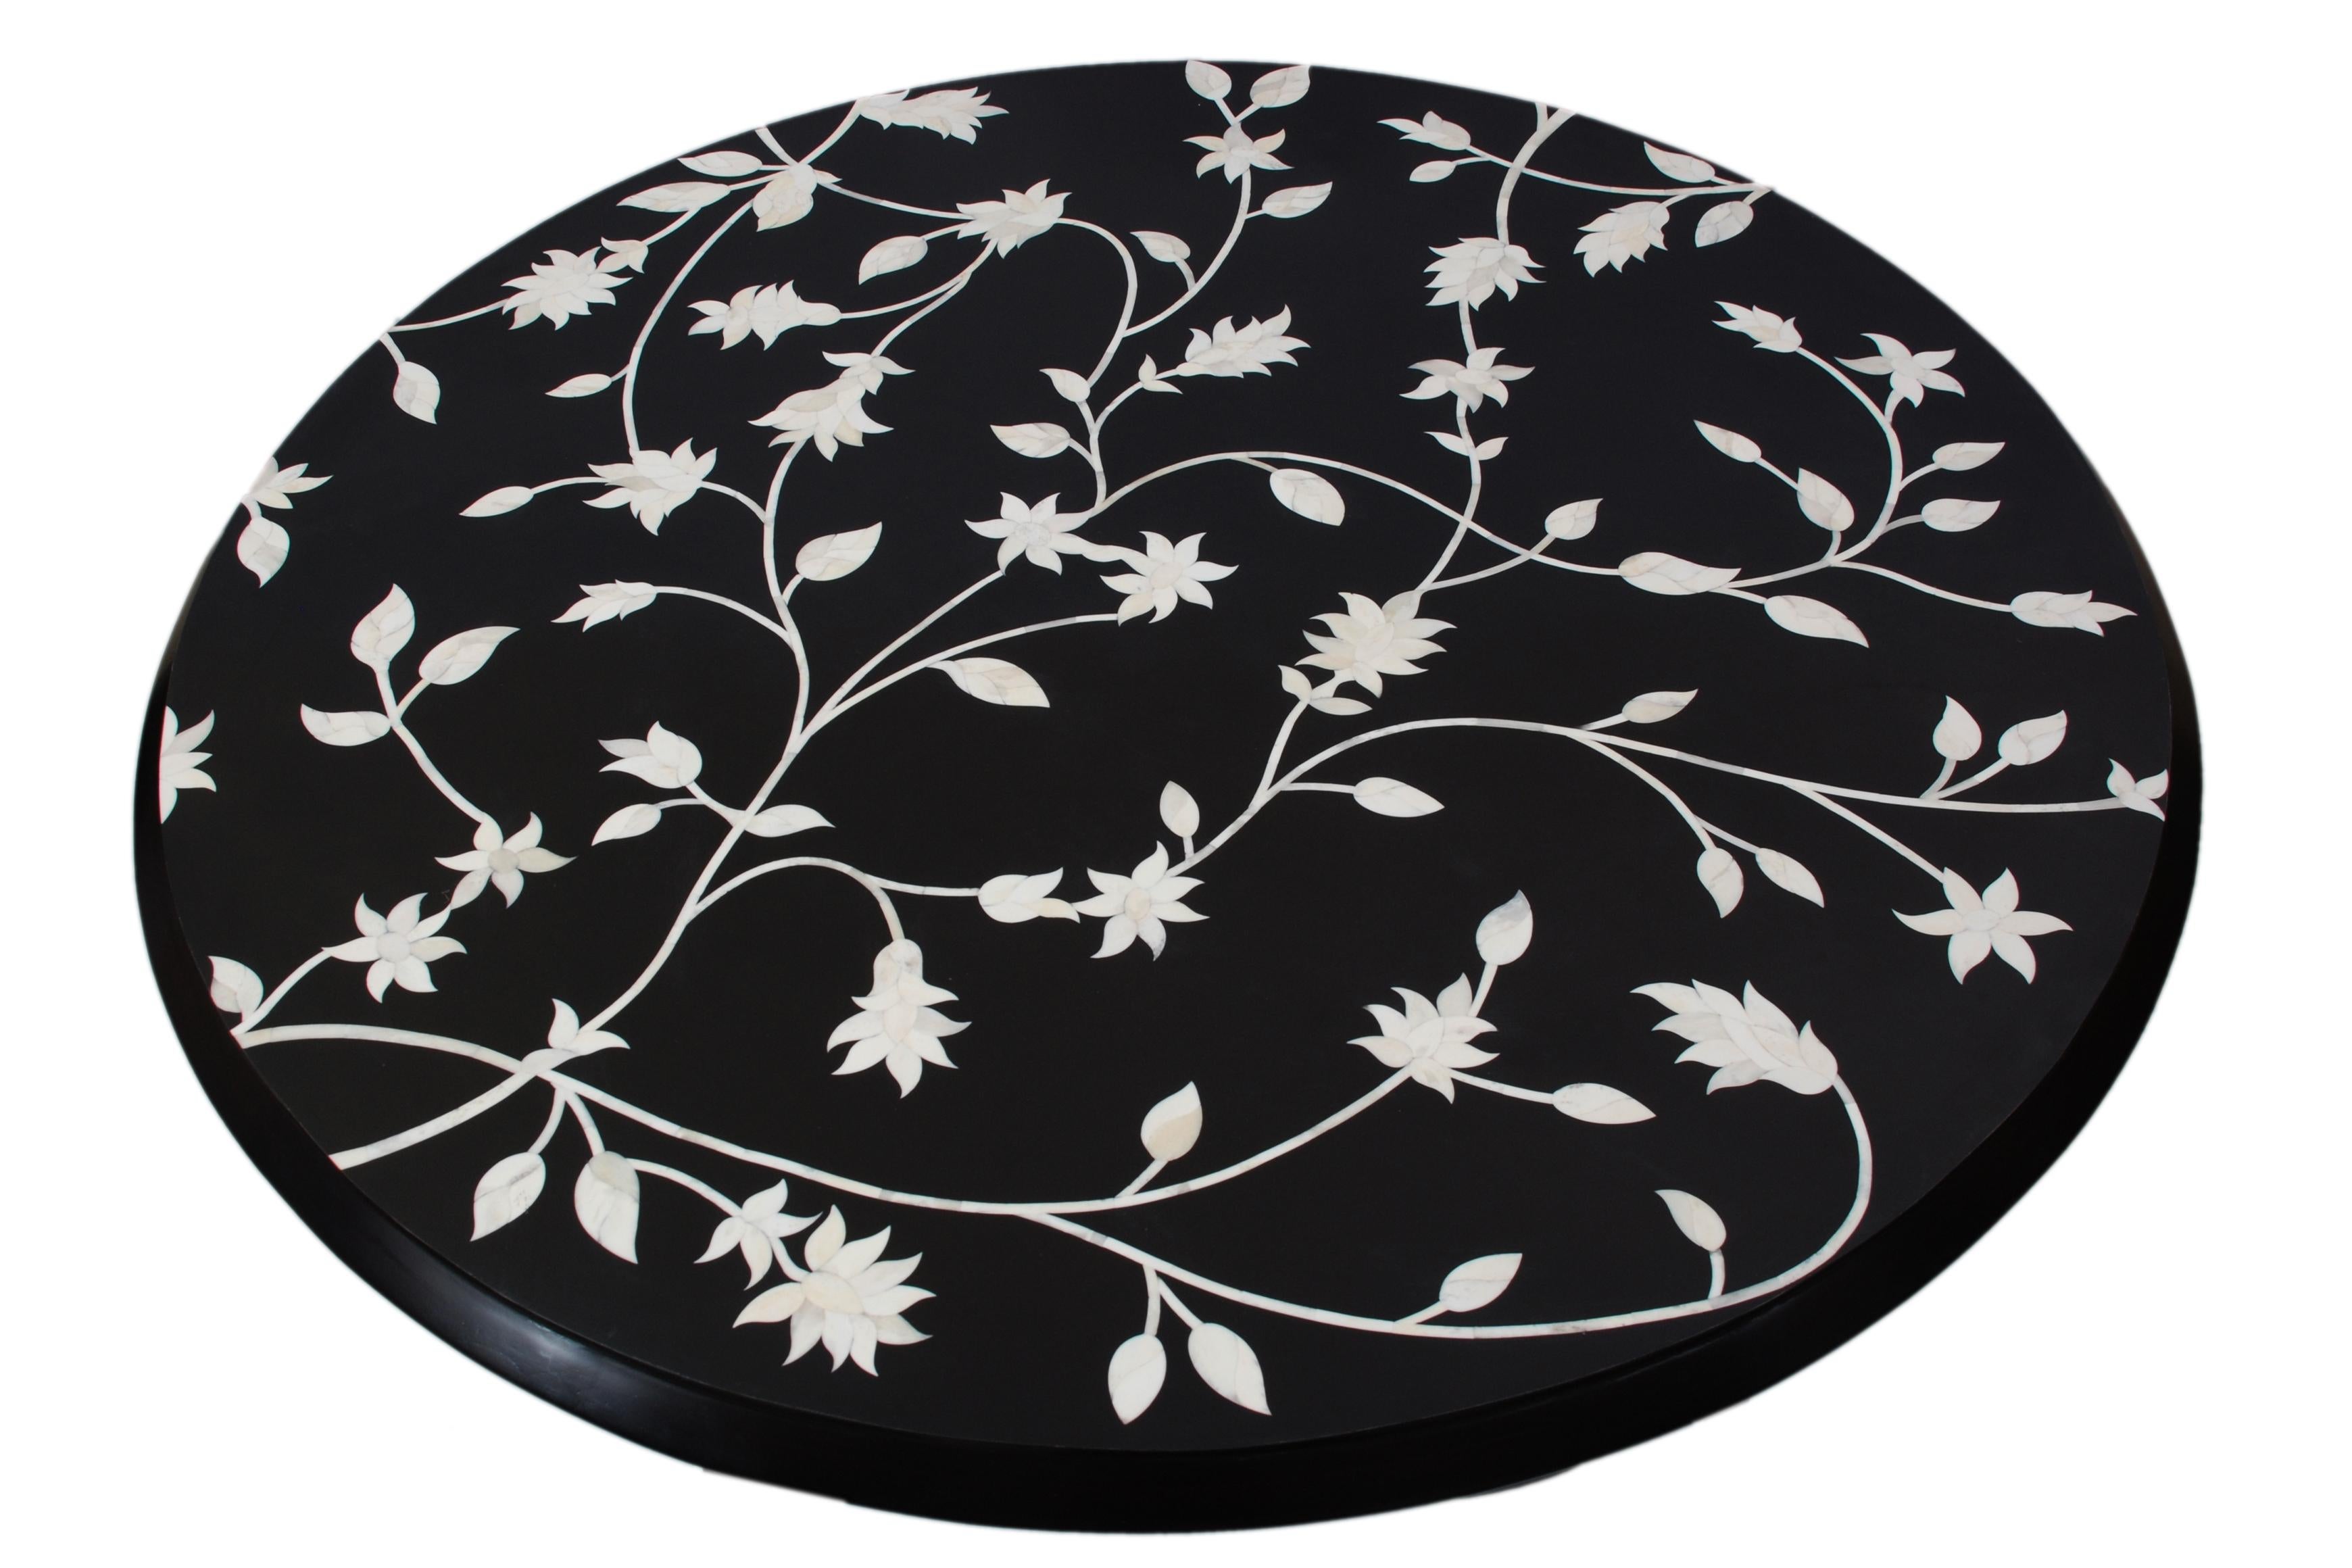 A celebration of nature, the Passion Lilies table integrates contrasting materials into one exquisite heirloom piece. Camel bone is handcut and inlaid to form a graceful floral pattern set in a sea of high-gloss water based resin.
Patterns and the